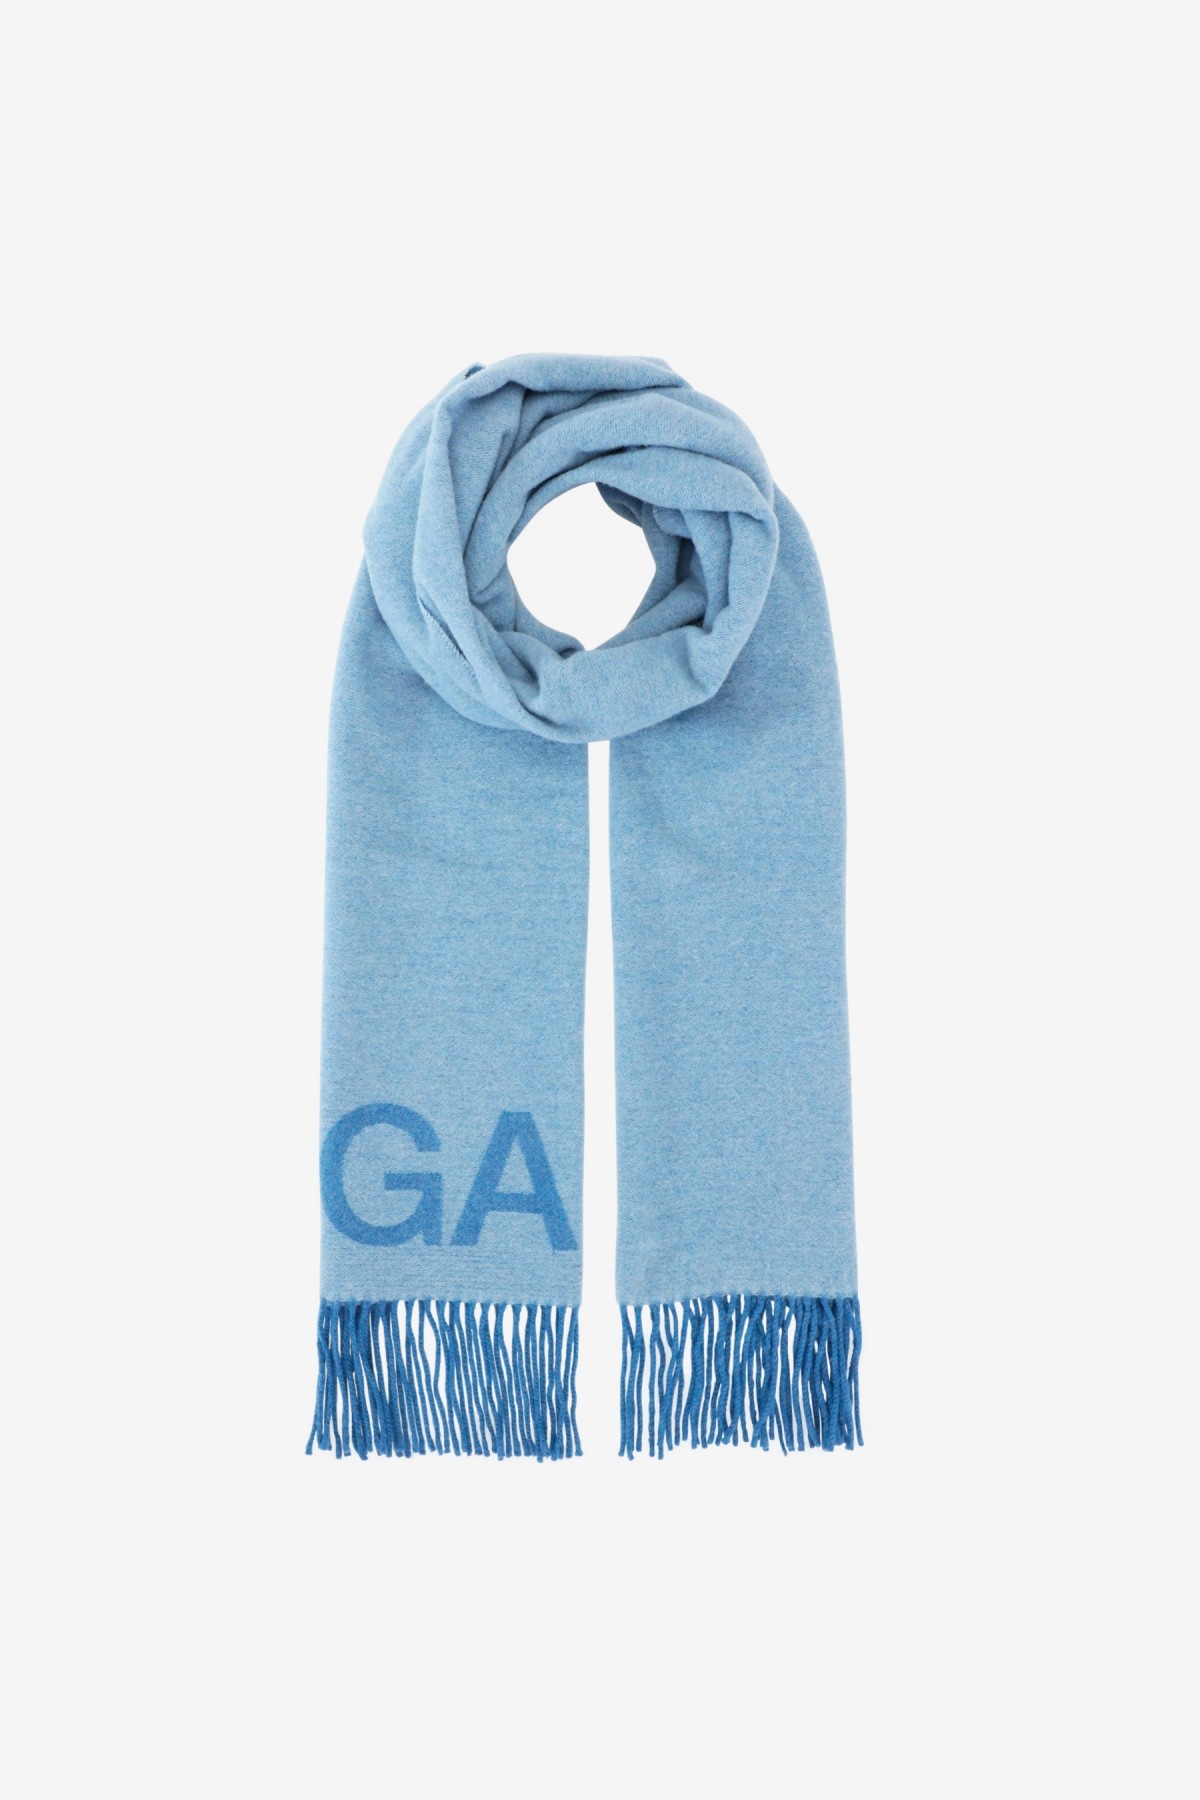 Ganni Recycled Wool Fringed Scarf in Light Blue Vintage